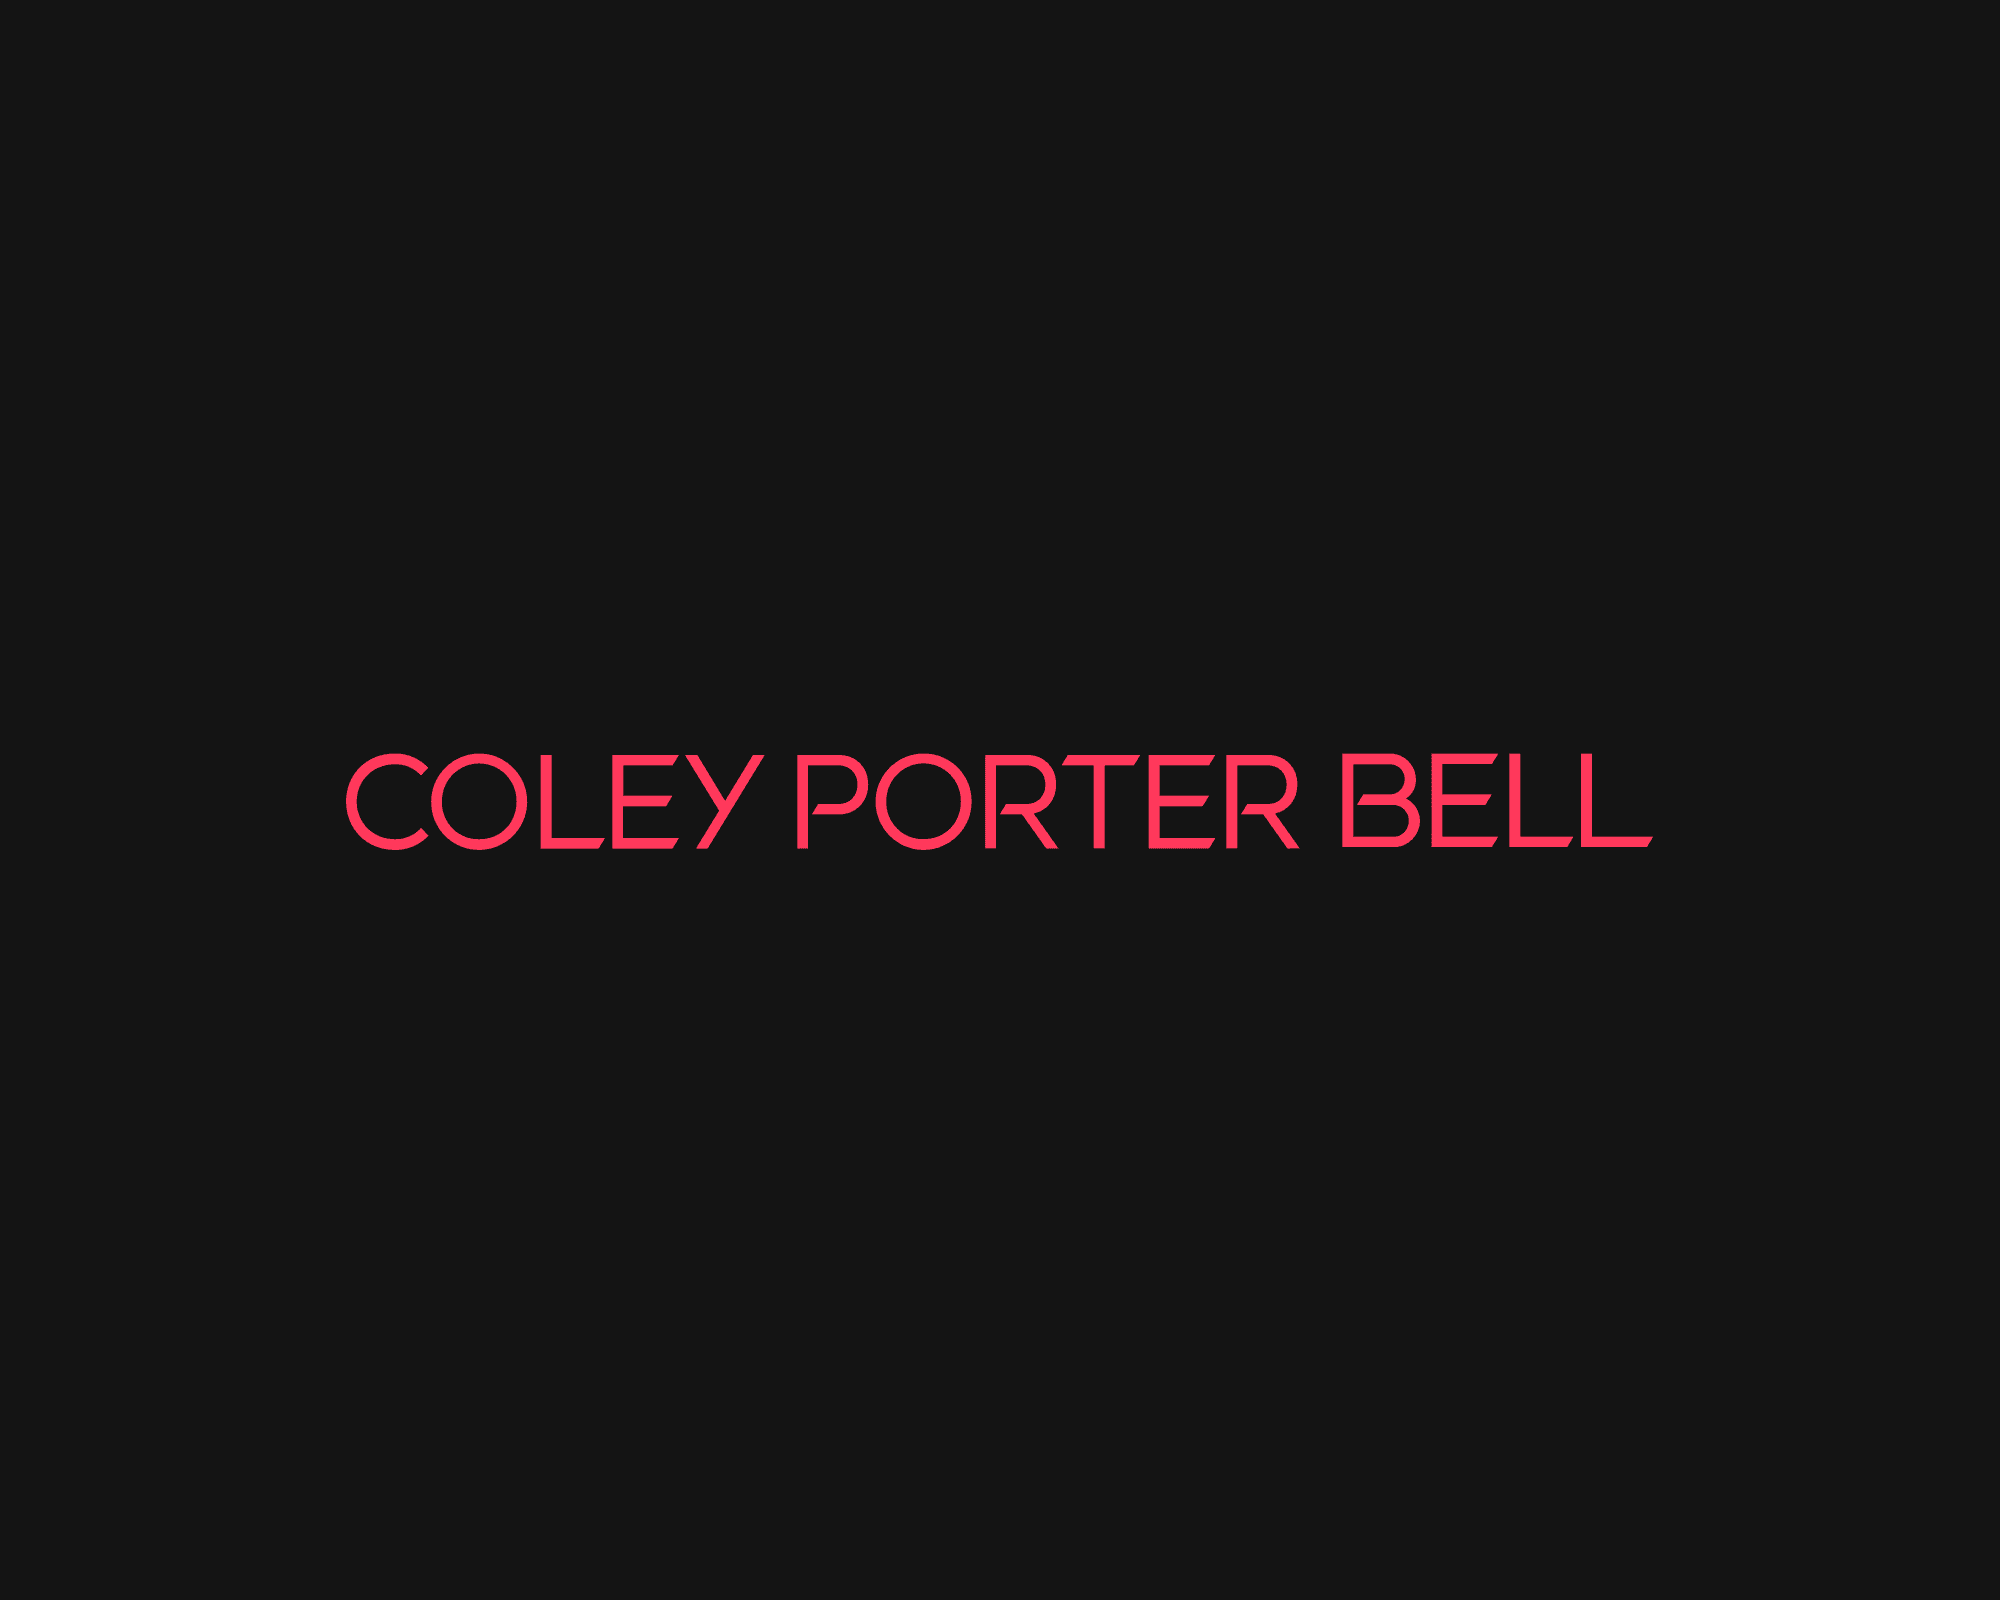 Product: Strategic Creative Brand Agency Services | Coley Porter Bell